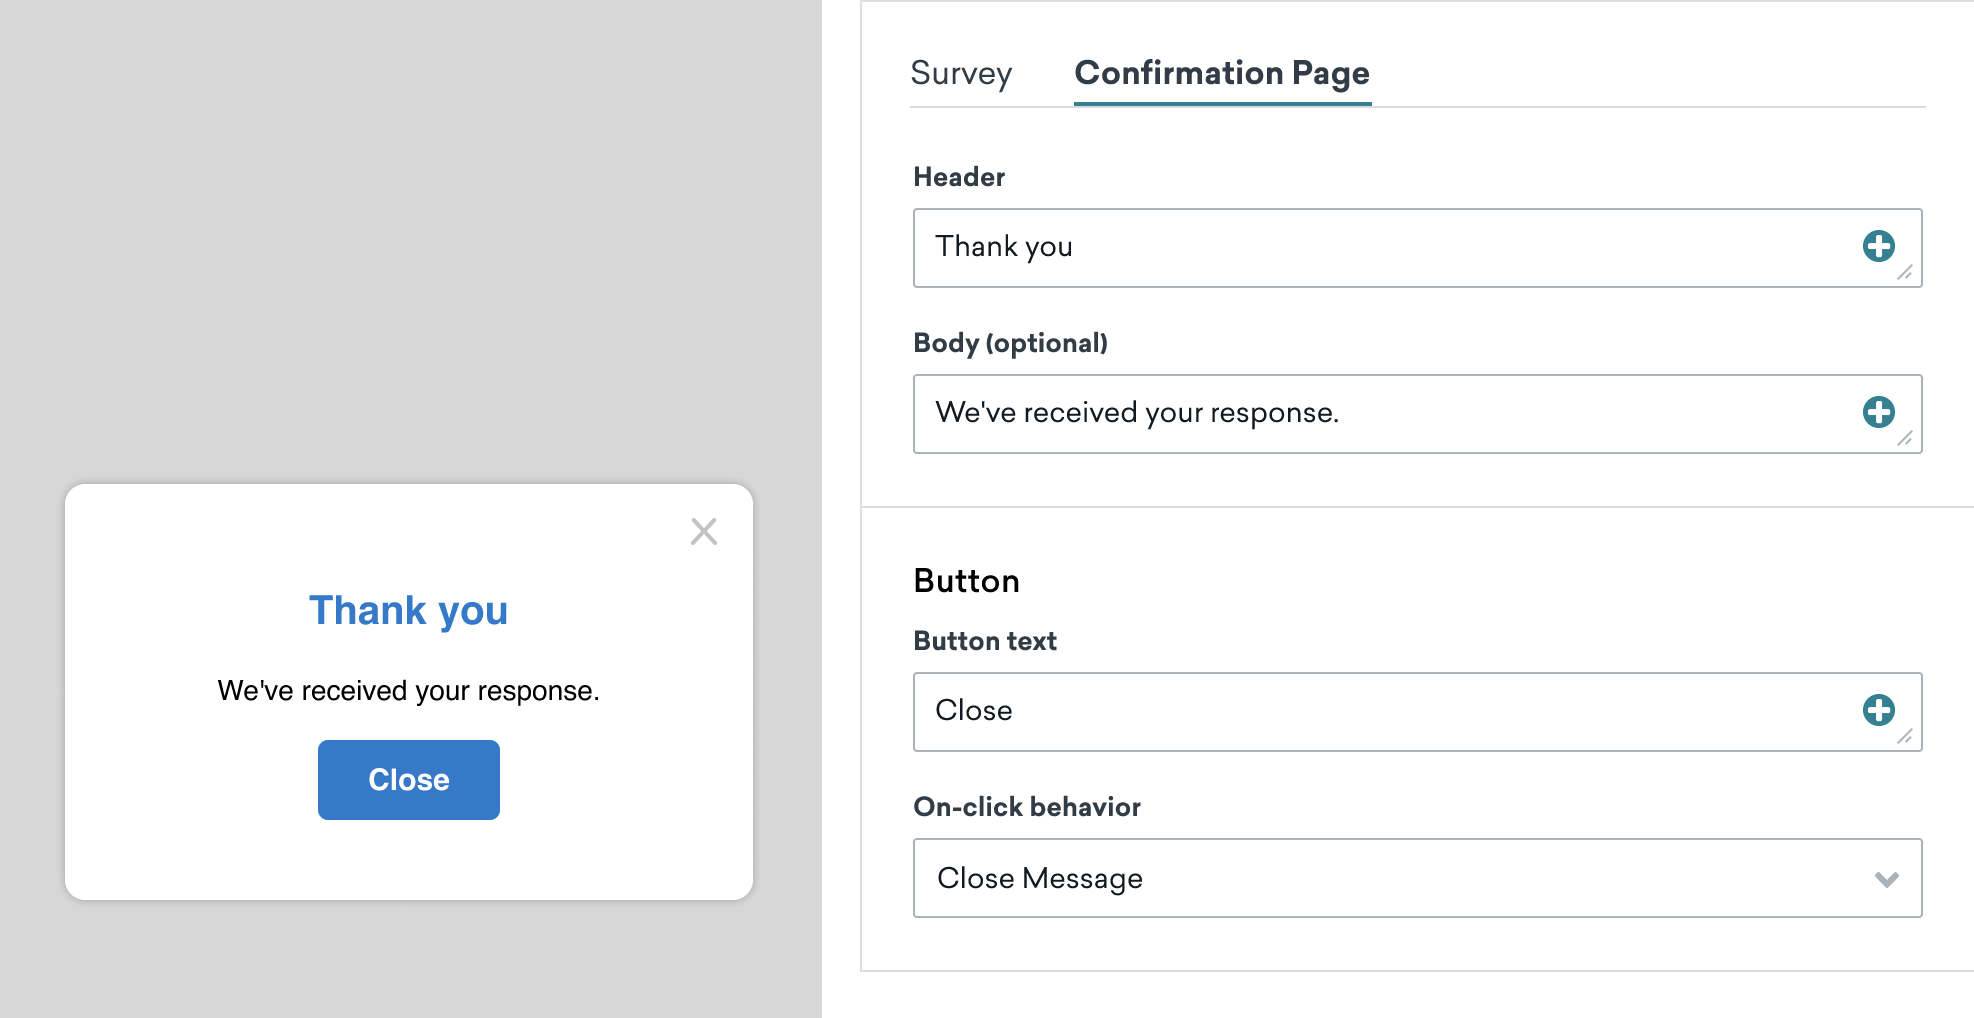 Confirmation Page tab of the simple survey editor. The available fields are header, optional body, button text, and button on-click behavior.